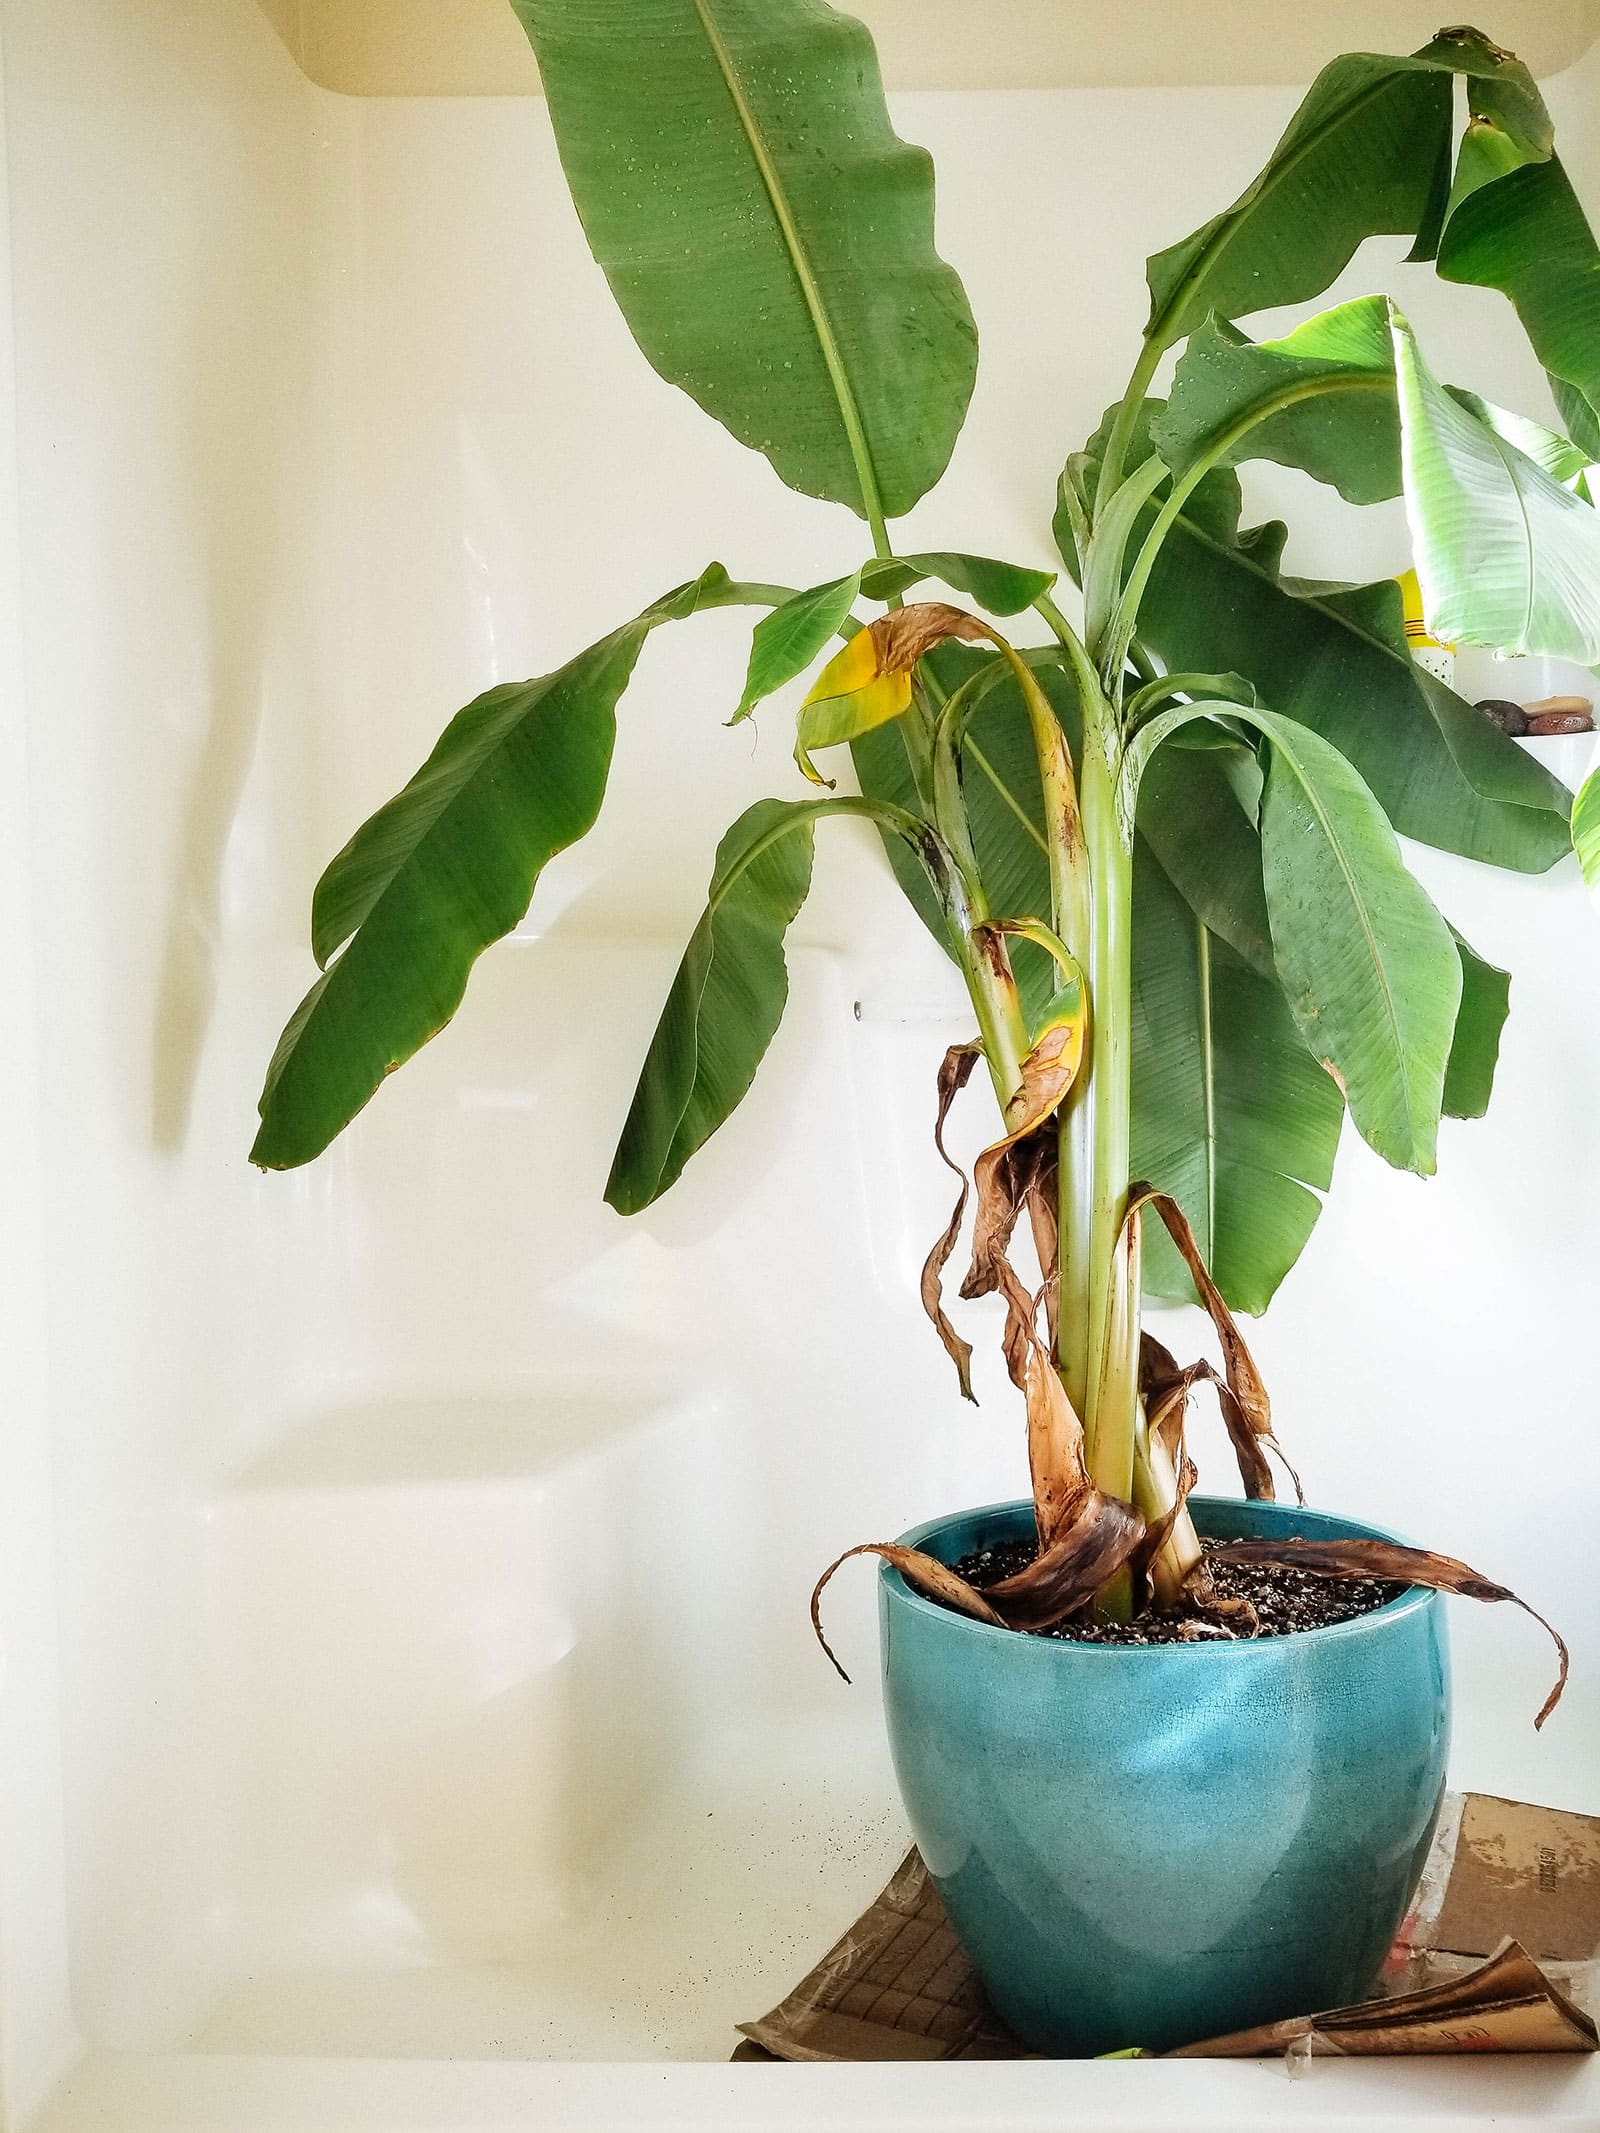 Large banana plant in a blue pot being watered in the shower